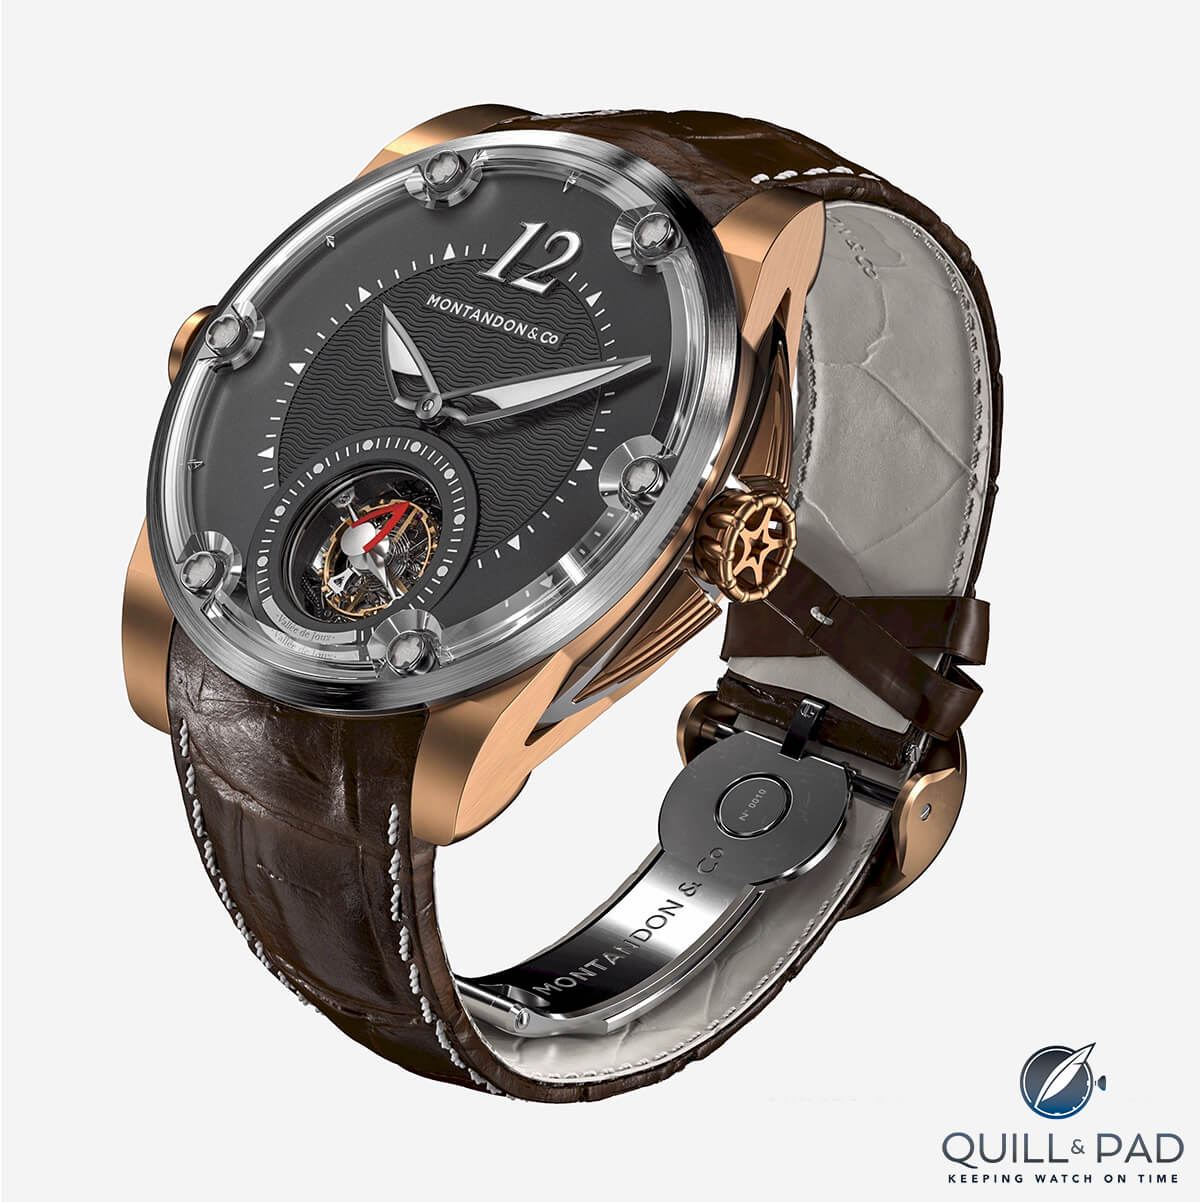 Montandon Windward in electro-stable bronze with dark dial